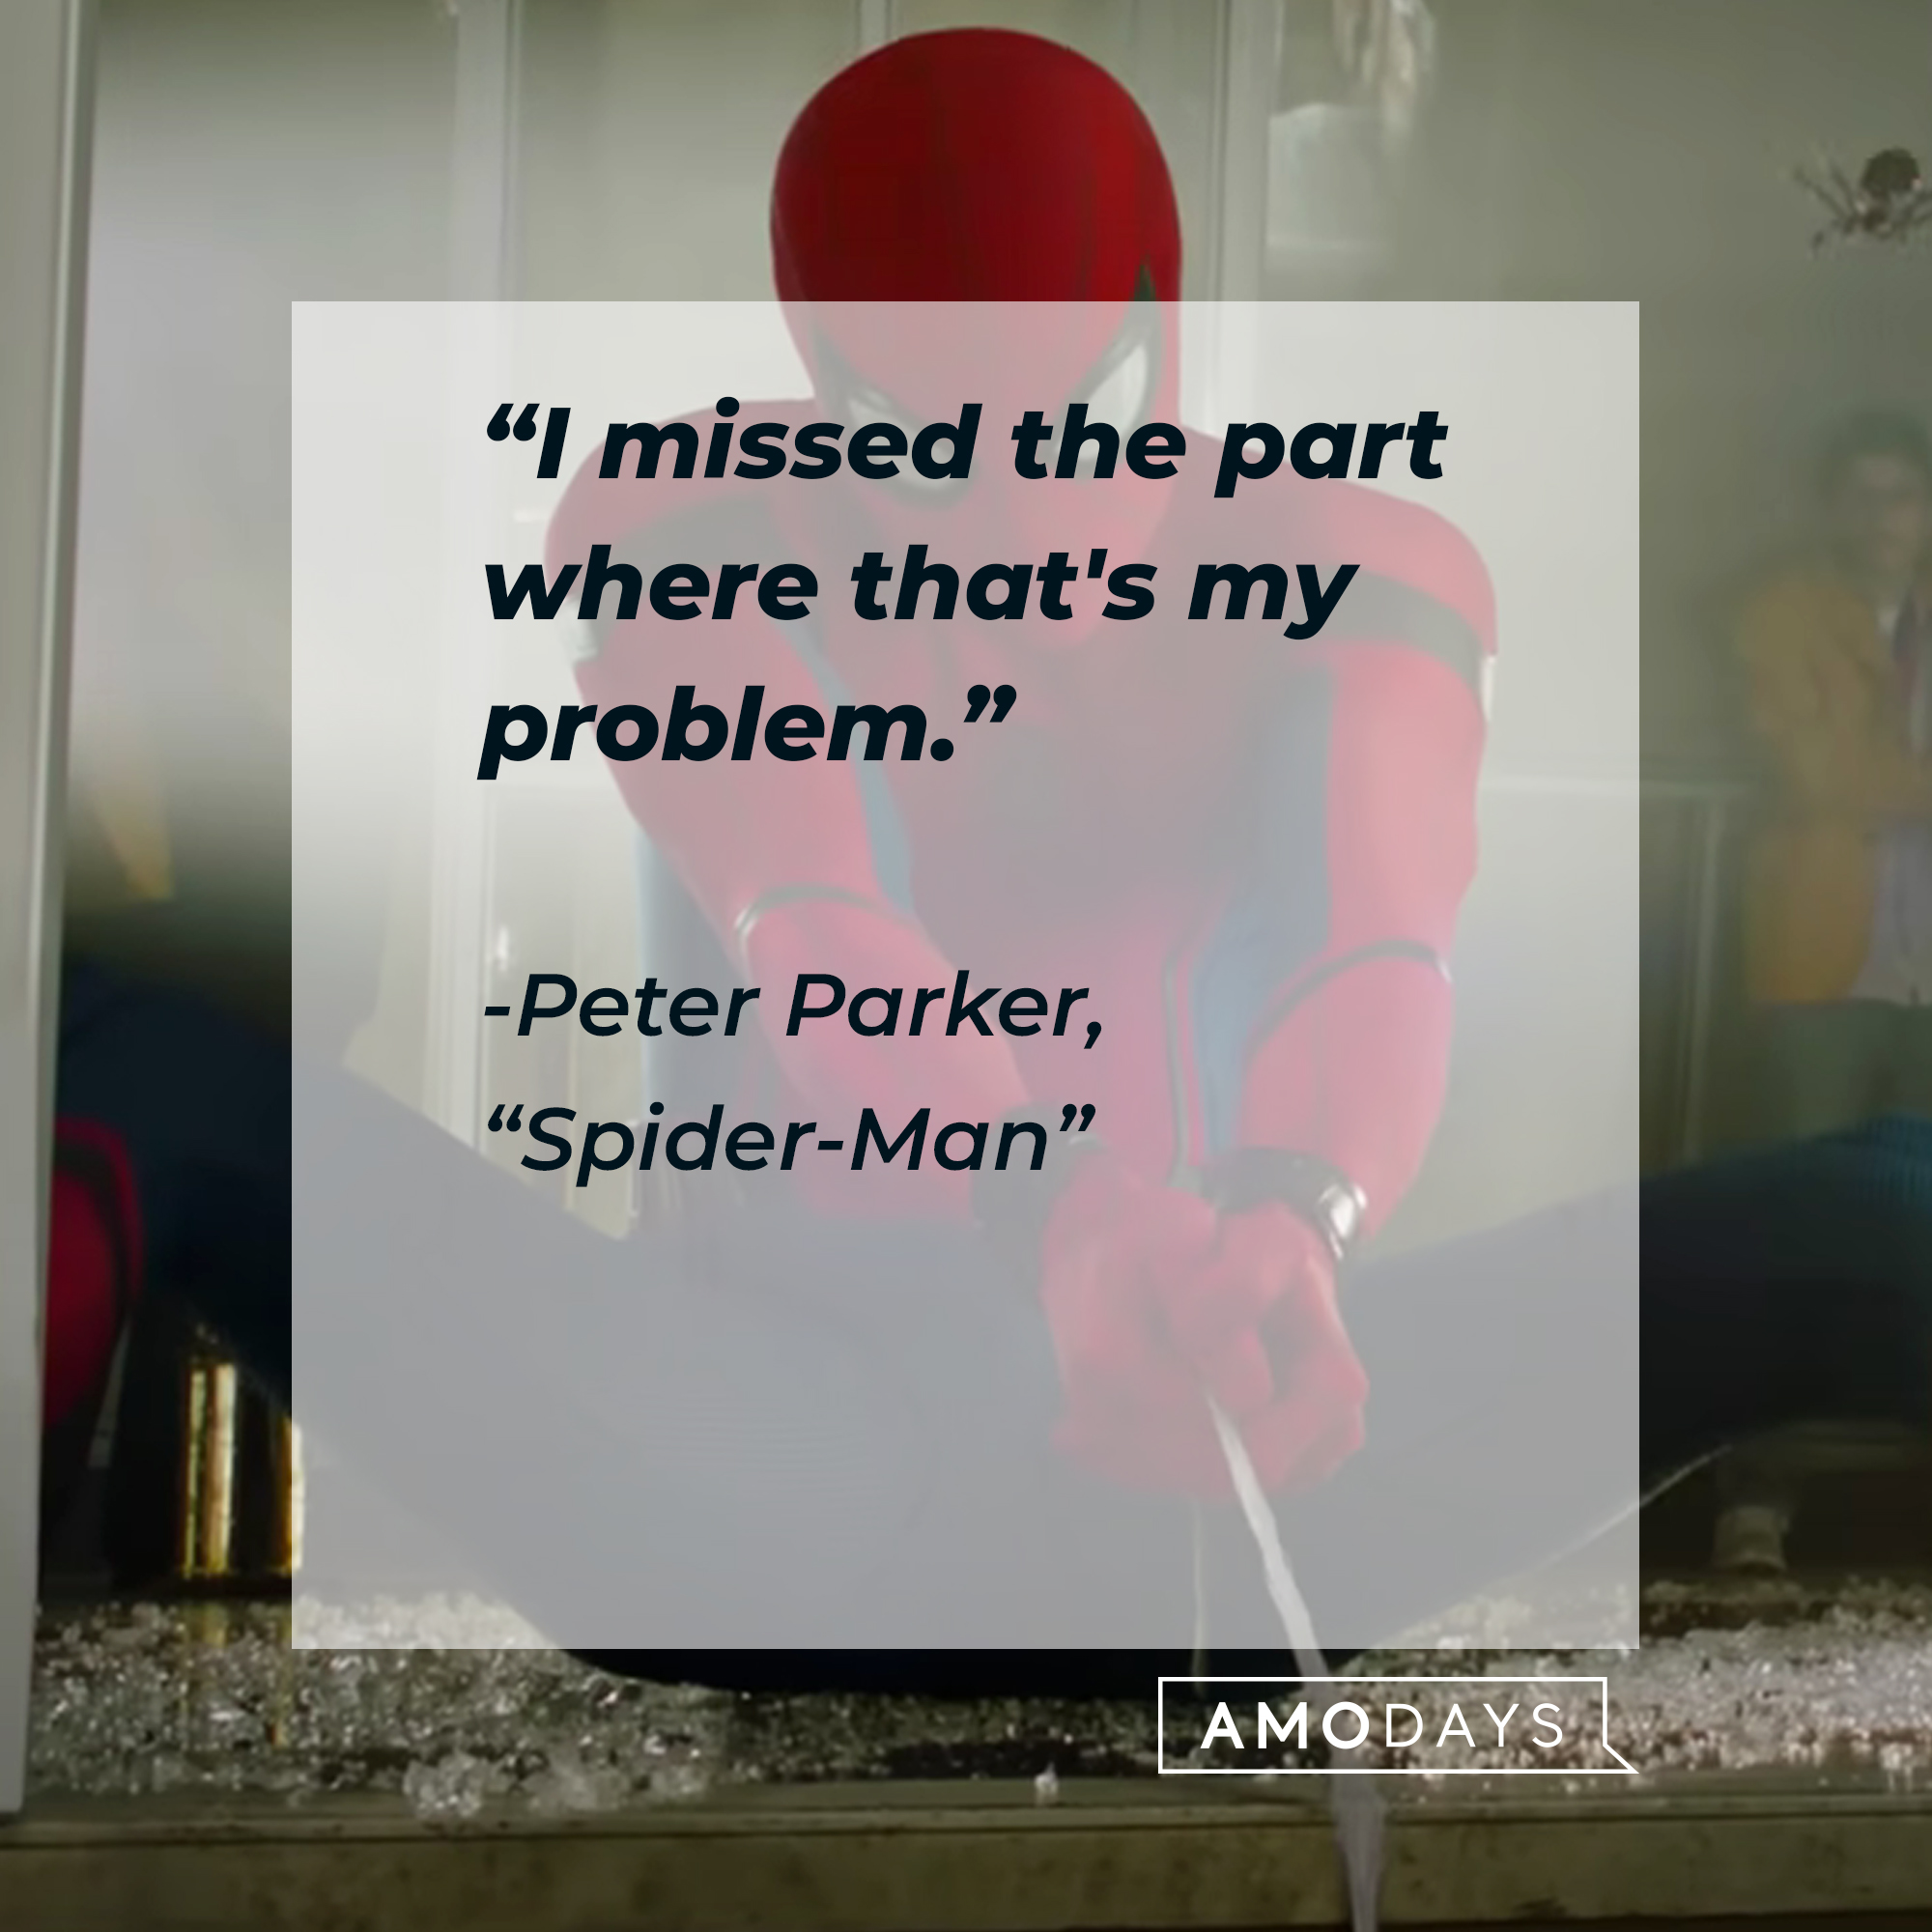 Spider-Man's quote from "Spider-Man:" “ I missed the part where that's my problem.”   | Source: Facebook.com/SpiderManMovie